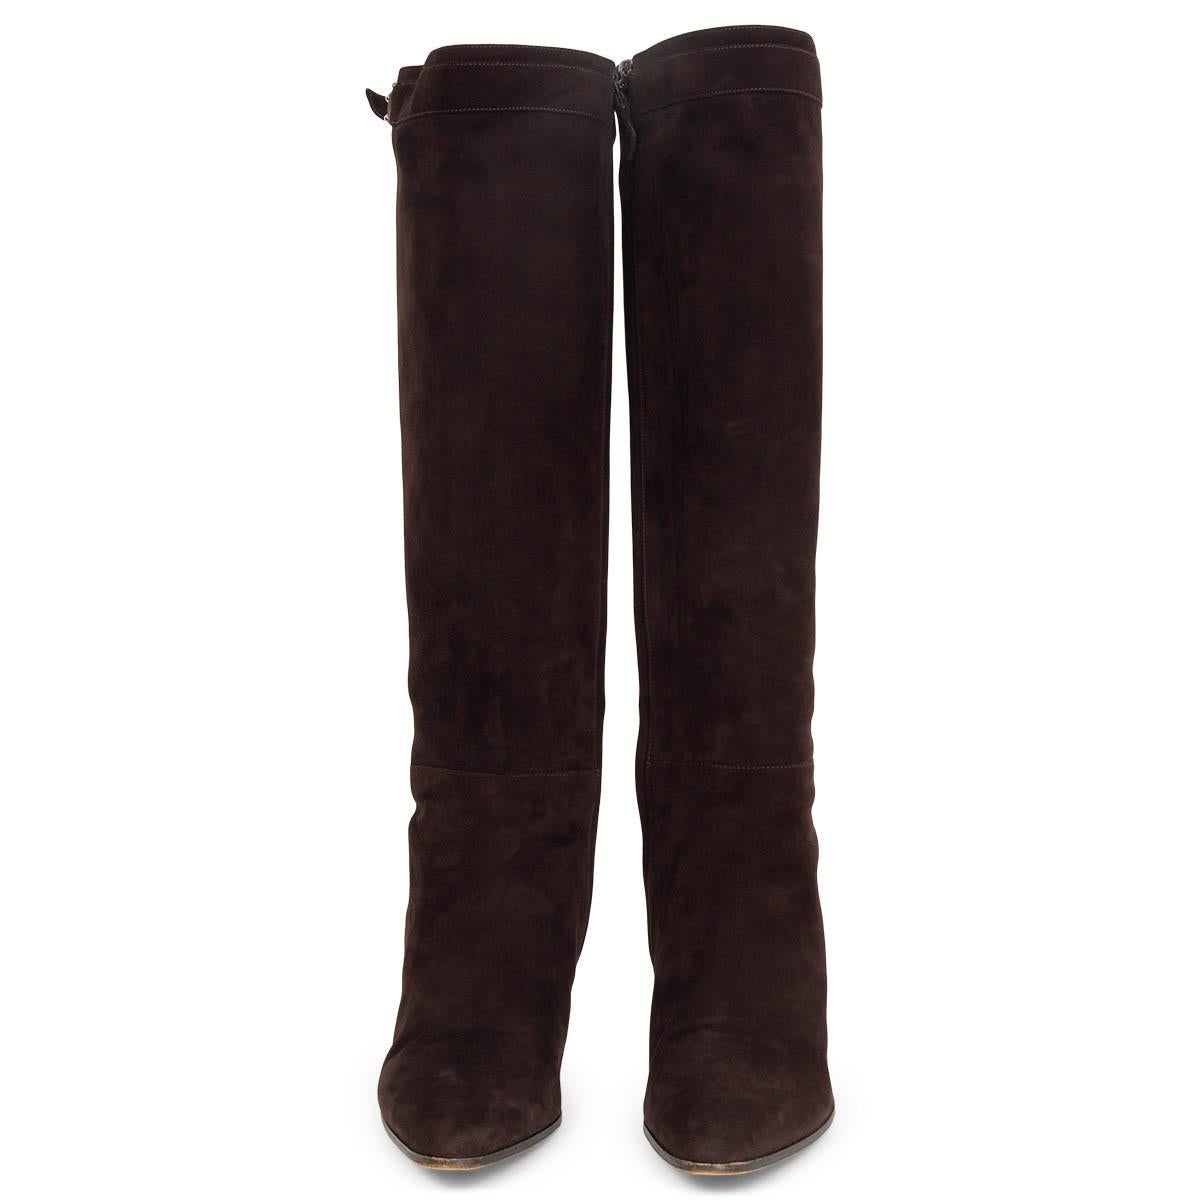  100% authentic Hermès knee-high almond-toe boots in brown suede leather embellished with Palladium lock depeches. Open with a zipper on the inside. Have been worn and are in excellent condition. 

Measurements
Imprinted Size	38.5
Shoe